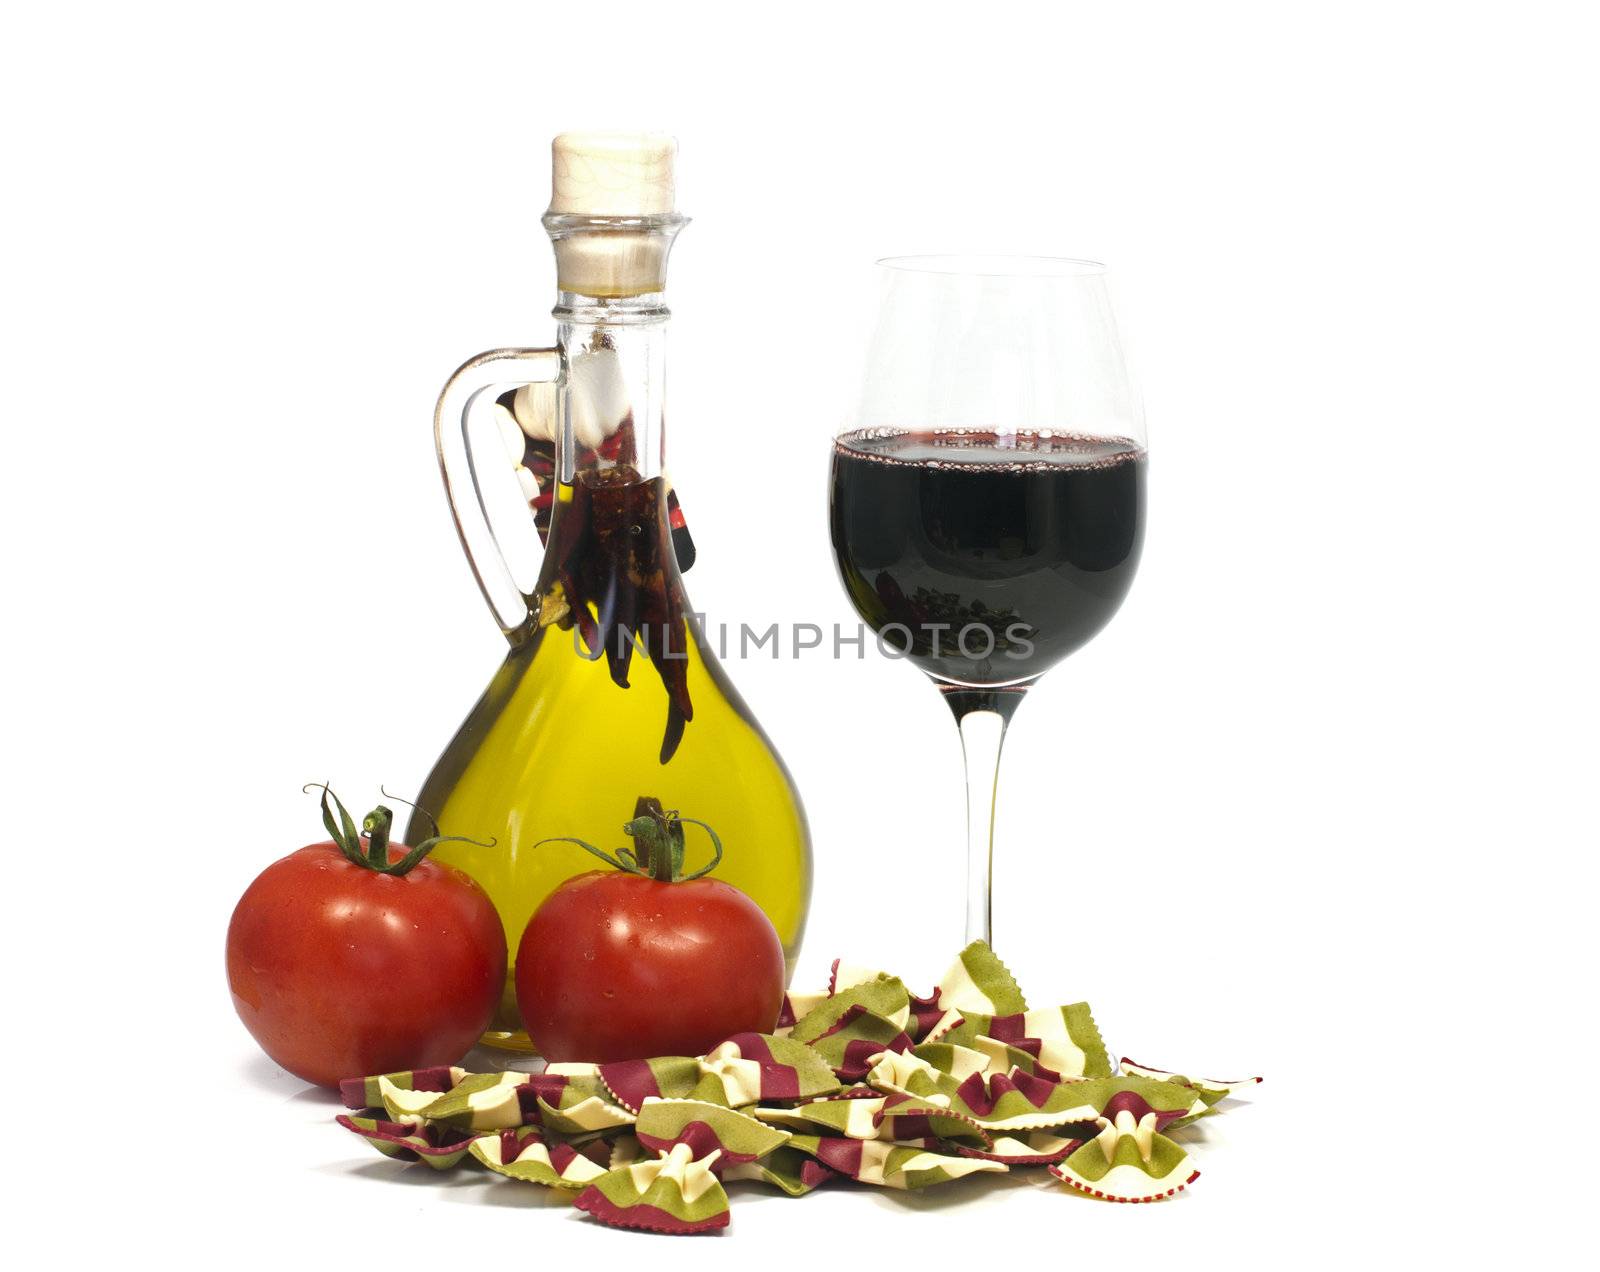 tomato bottle of oil and glass red wine with pasta